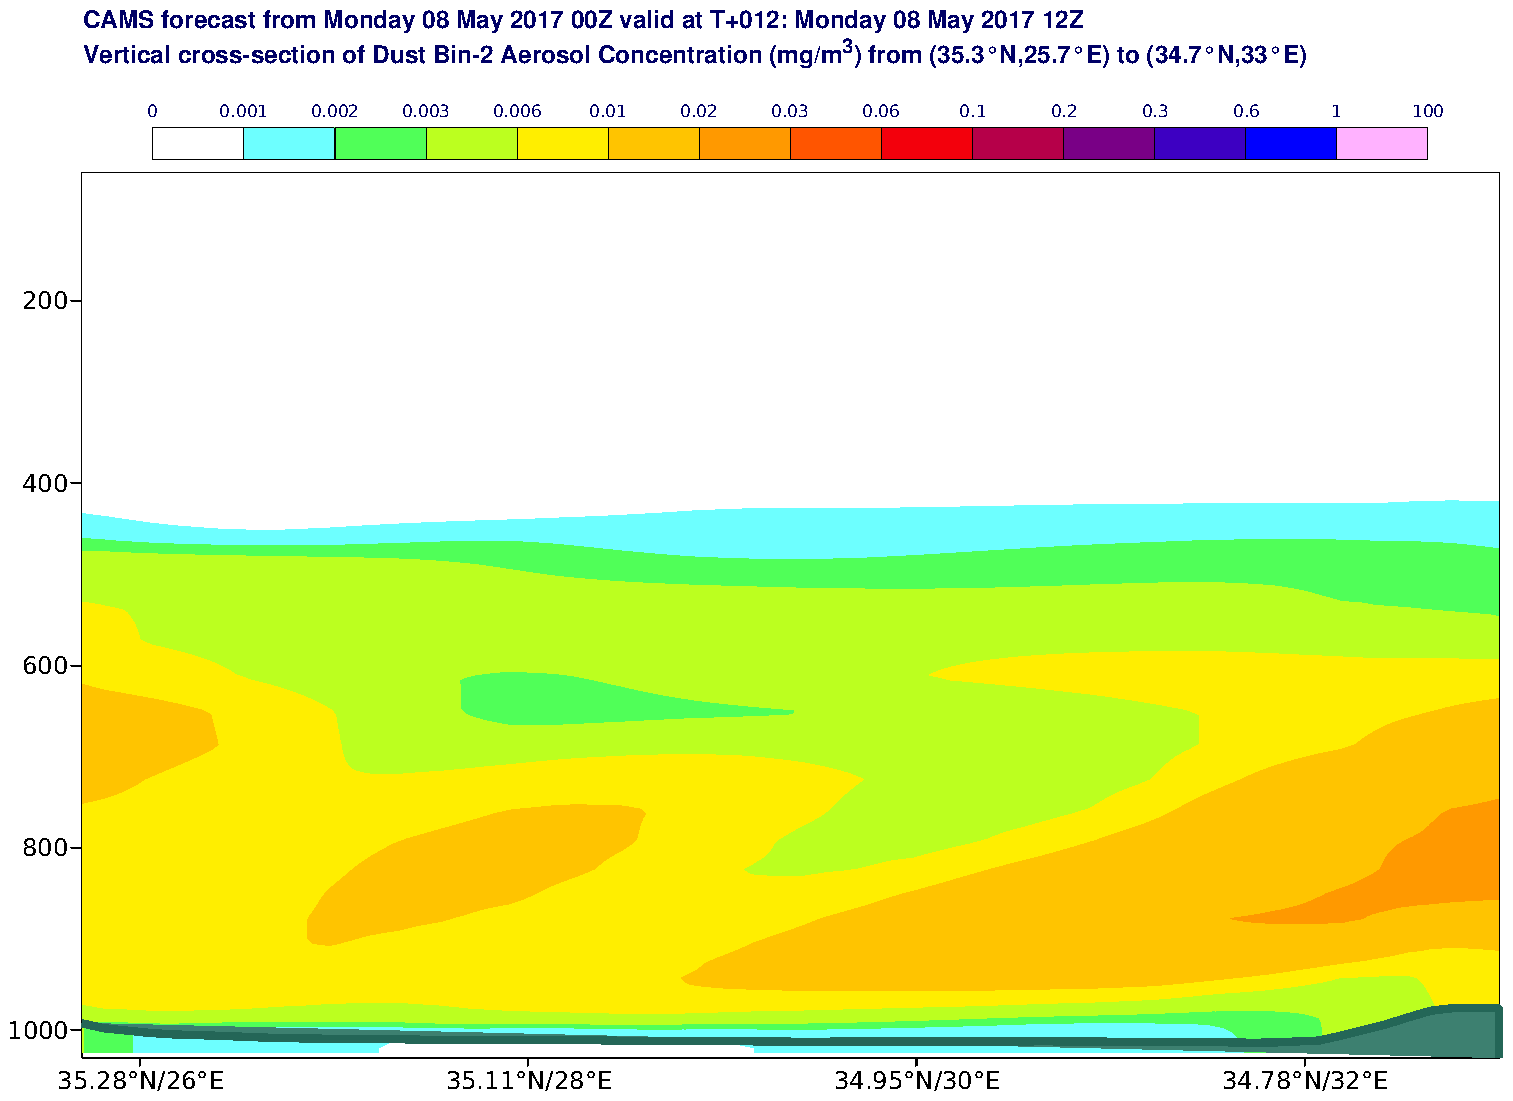 Vertical cross-section of Dust Bin-2 Aerosol Concentration (mg/m3) valid at T12 - 2017-05-08 12:00